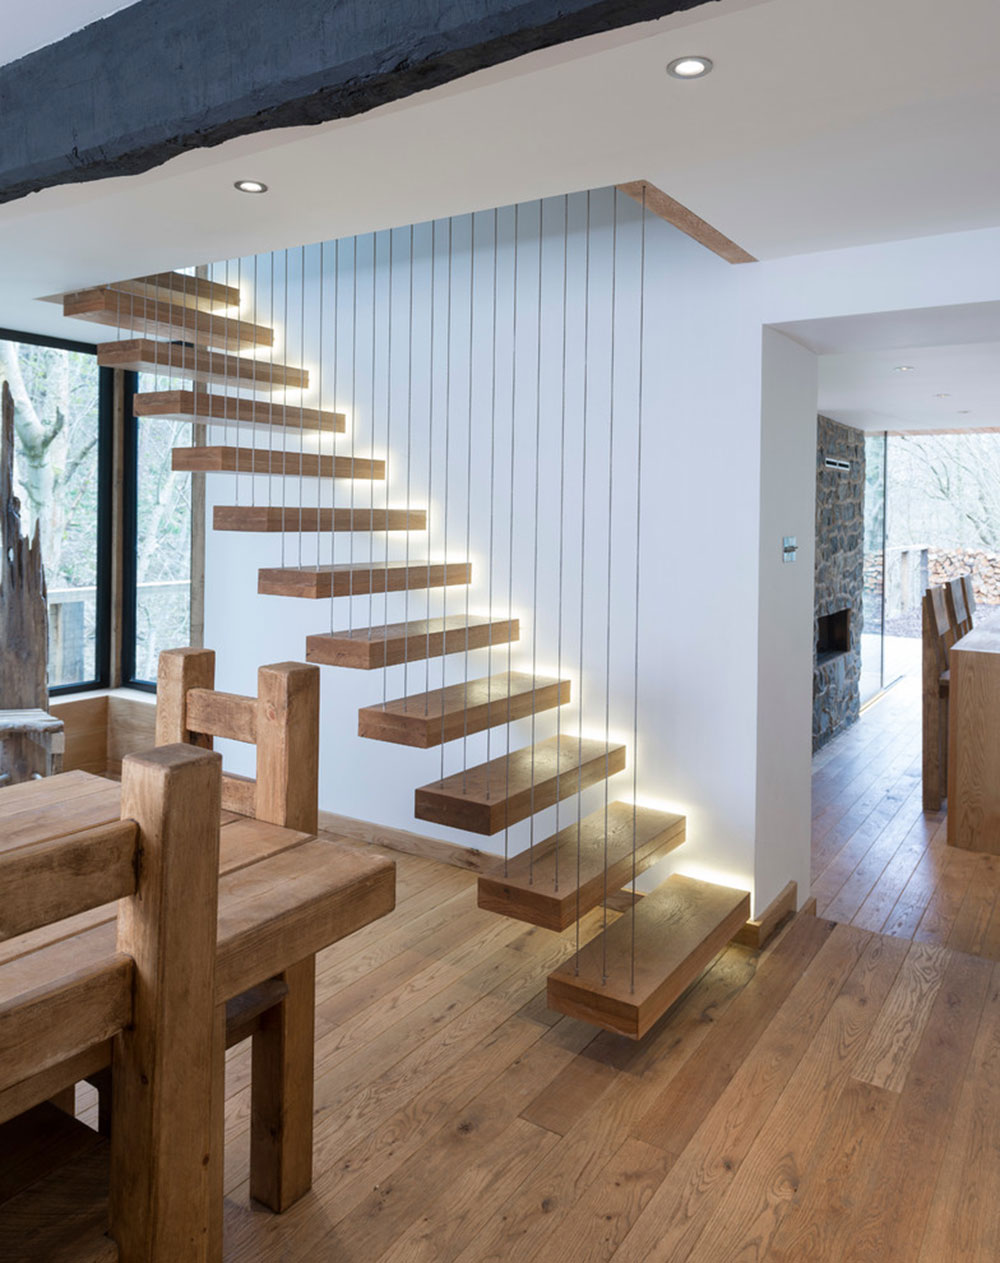 Modern and Exquisite Floating Staircase6 Modern and exquisite floating staircase designs